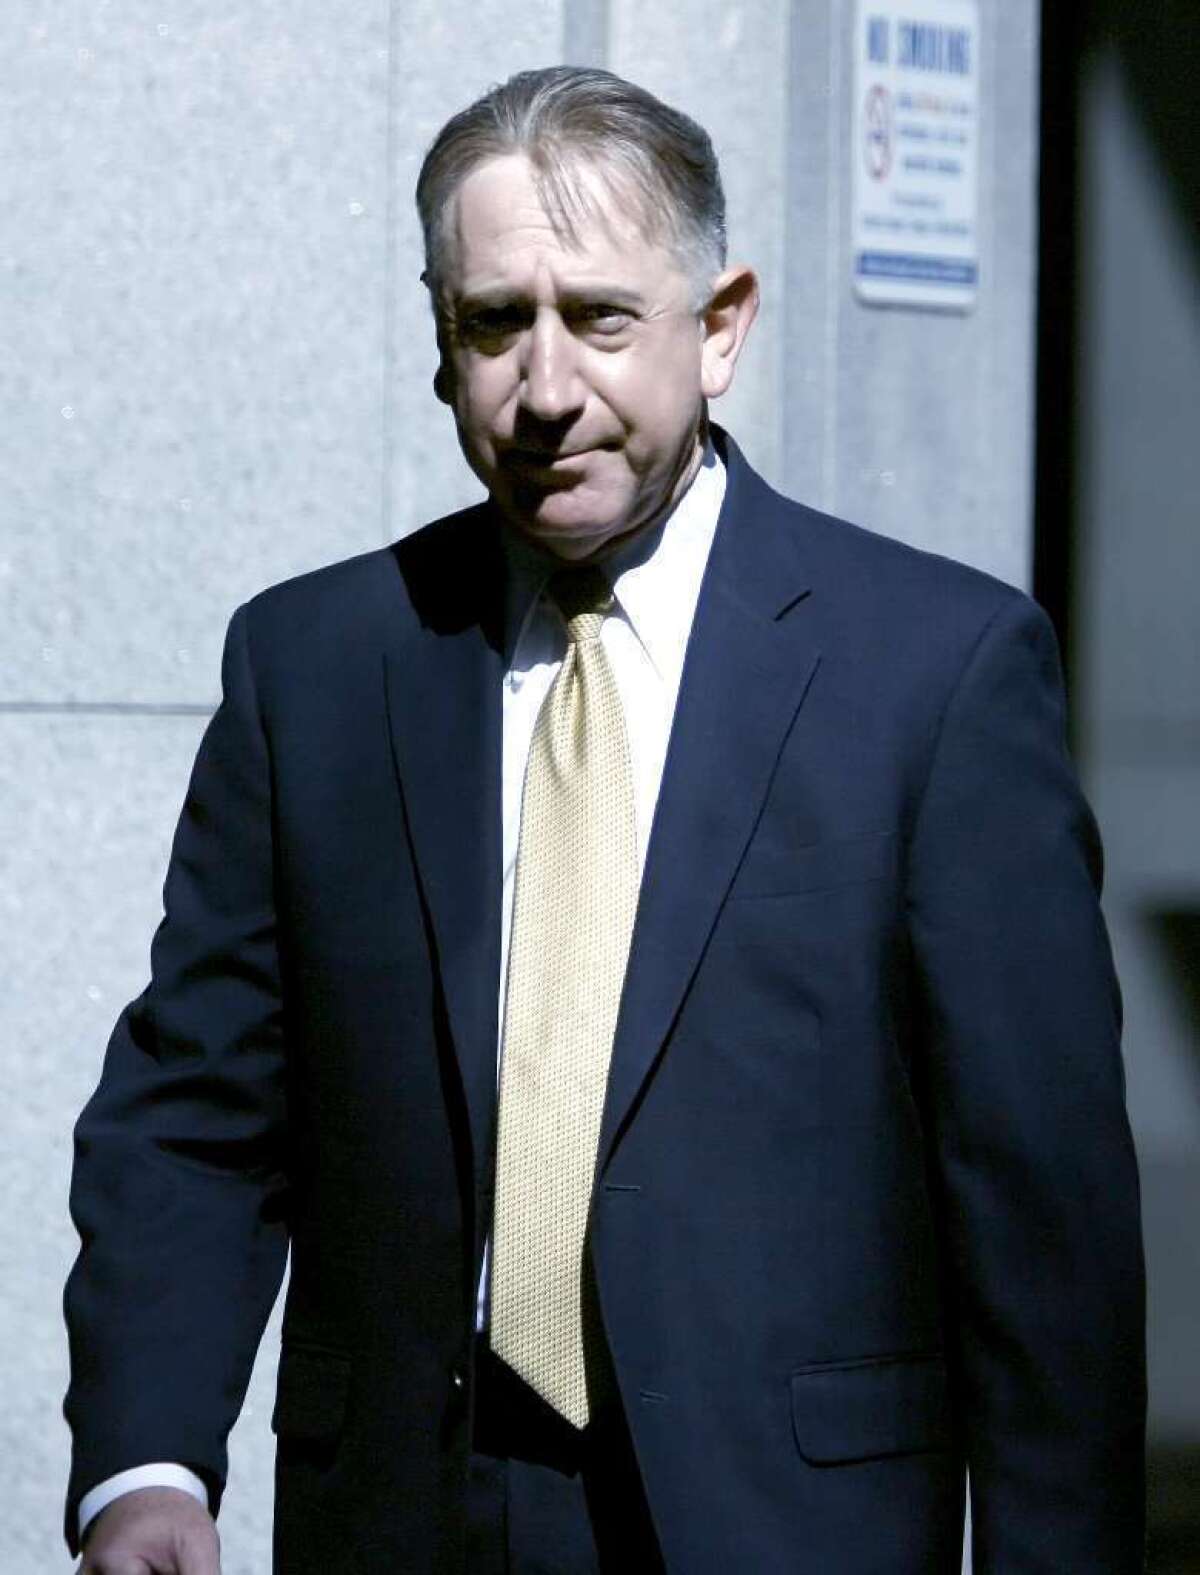 File Photo: Former Glendale Councilman John Drayman arrives to be arraigned in May 2012 at the C. S. Foltz Criminal Justice Center in Los Angeles. Los Angeles Superior Court Judge Stephen A. Marcus rejected a second plea deal from Drayman in a downtown courtroom on Monday, March 10, 2014. Drayman allegedly embezzled at least $304,000 from Montrose farmers market.